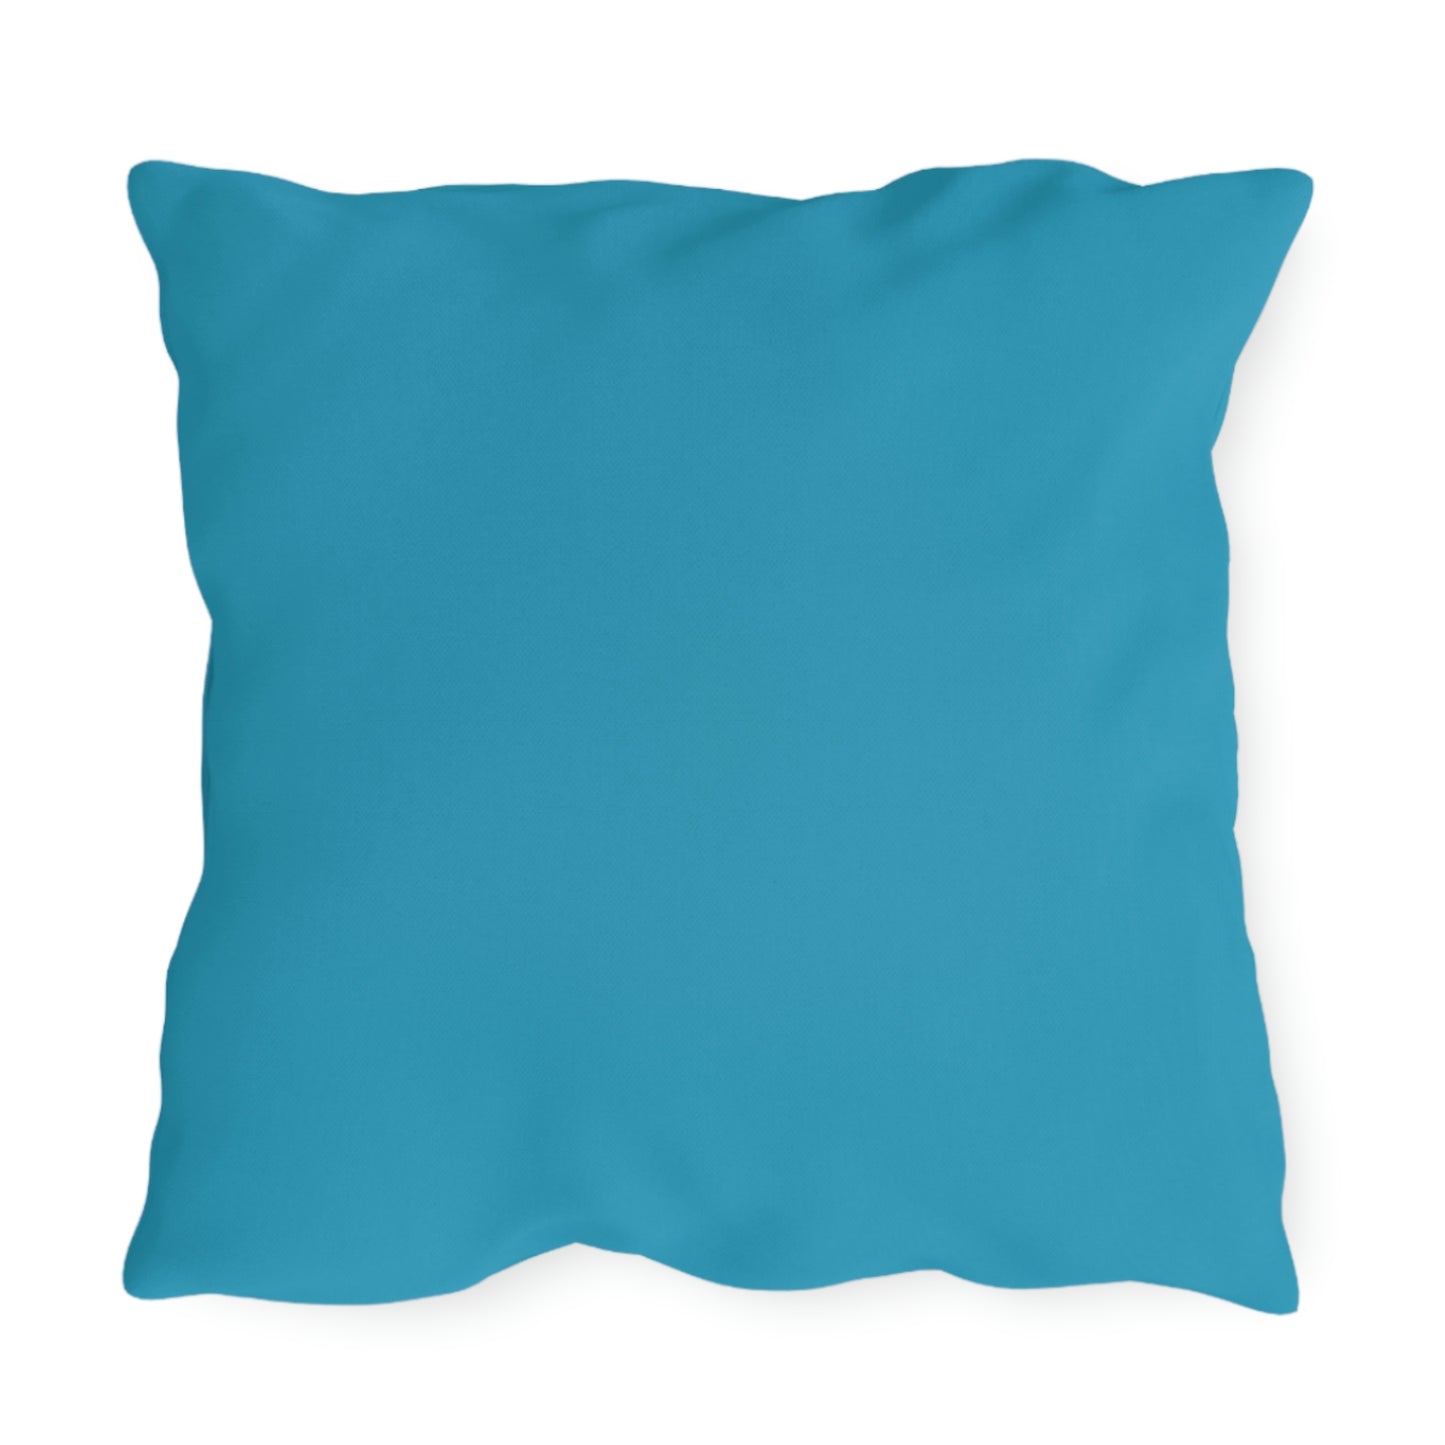 Teal Blue, Gold, Orange & Fuchsia Pillow COVER ONLY for Outdoor Living, Firepit Seating, Porch Swings, Keep Pillows Clean, Attractive Decor